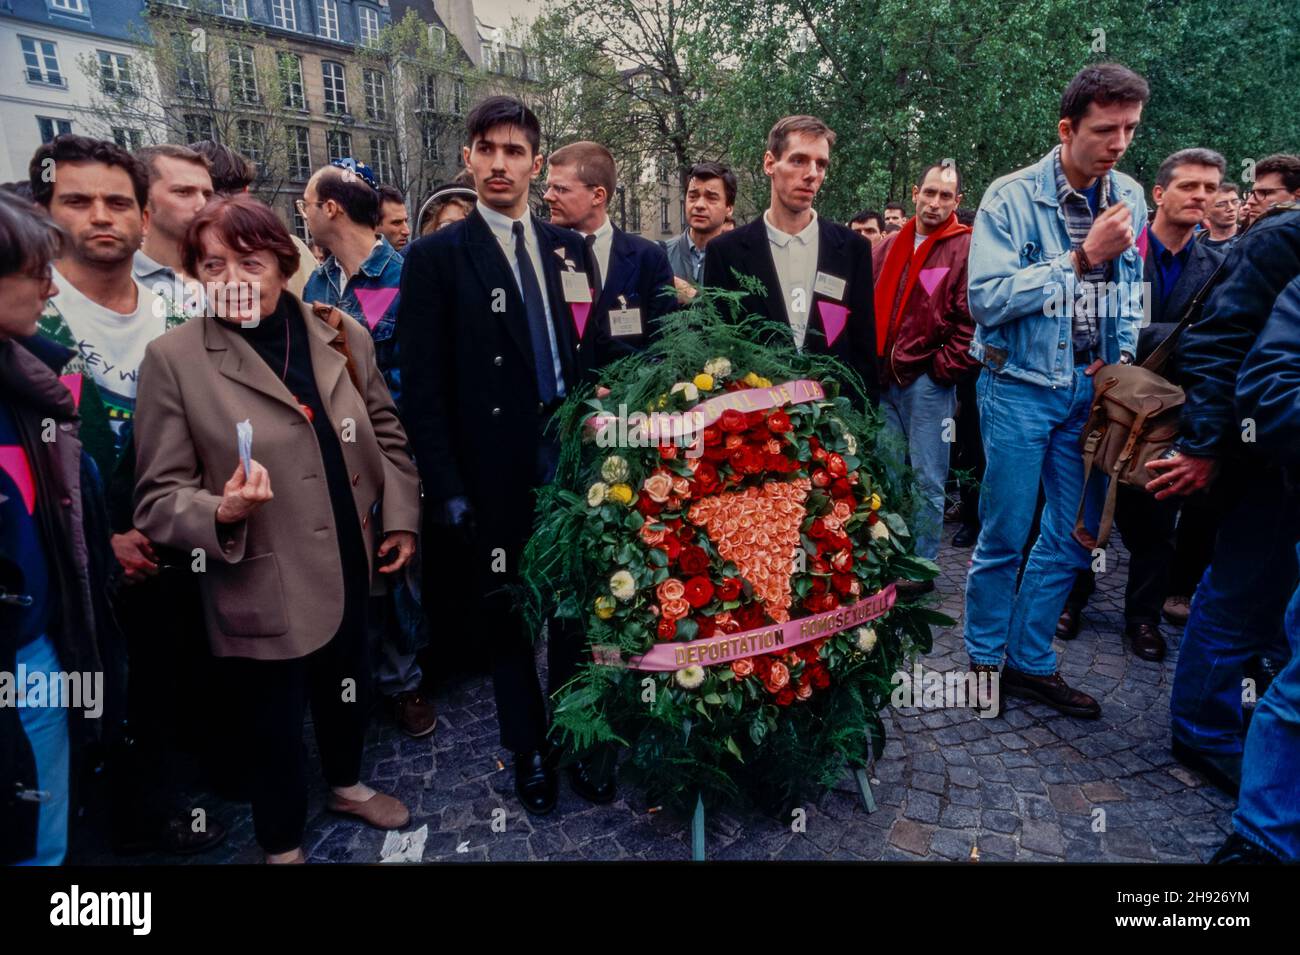 Paris, France, Crowd Gay Men, Memorial Ceremony Homosexuel Deportation, WWII AND pink triangle, April, 1996, violence against gay men, gay protest vintage Stock Photo